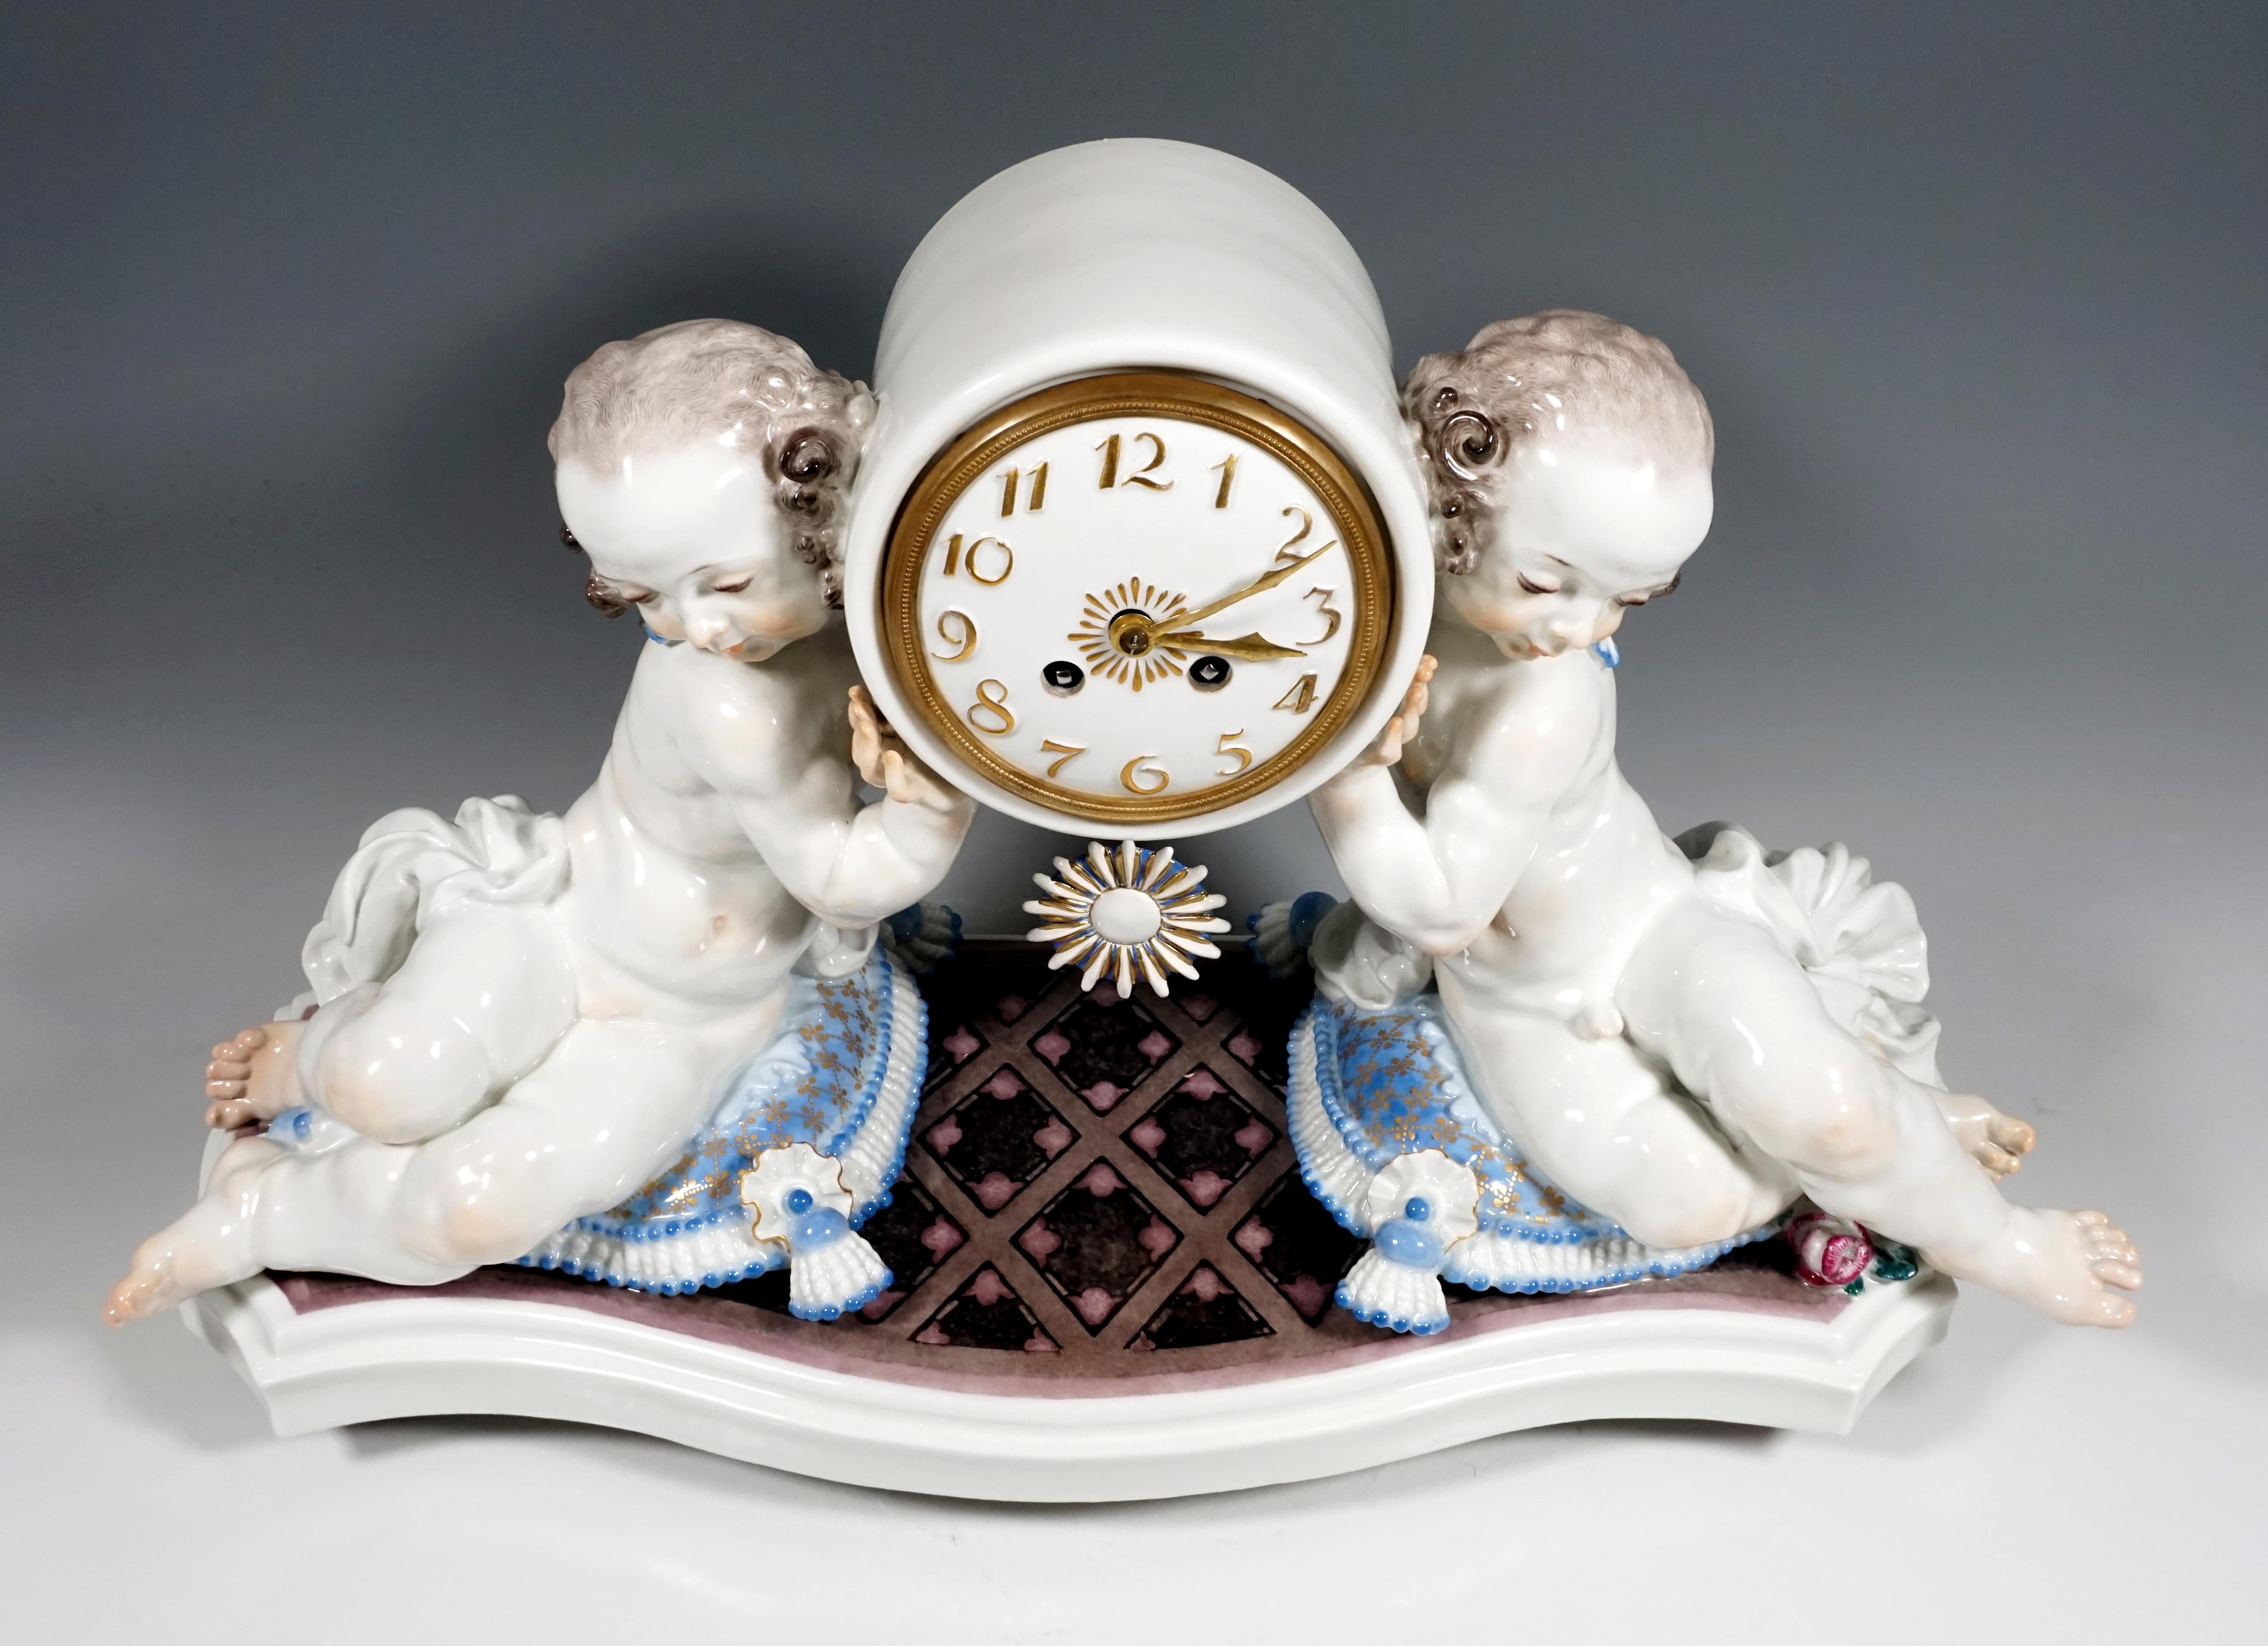 On a curved base plate with diamond pattern in marble look, sculptured cushions with tassel decoration, on the side seated figures, girl and boy, who gracefully carry the round clock case. White porcelain dial with applied Arabic numerals and hands